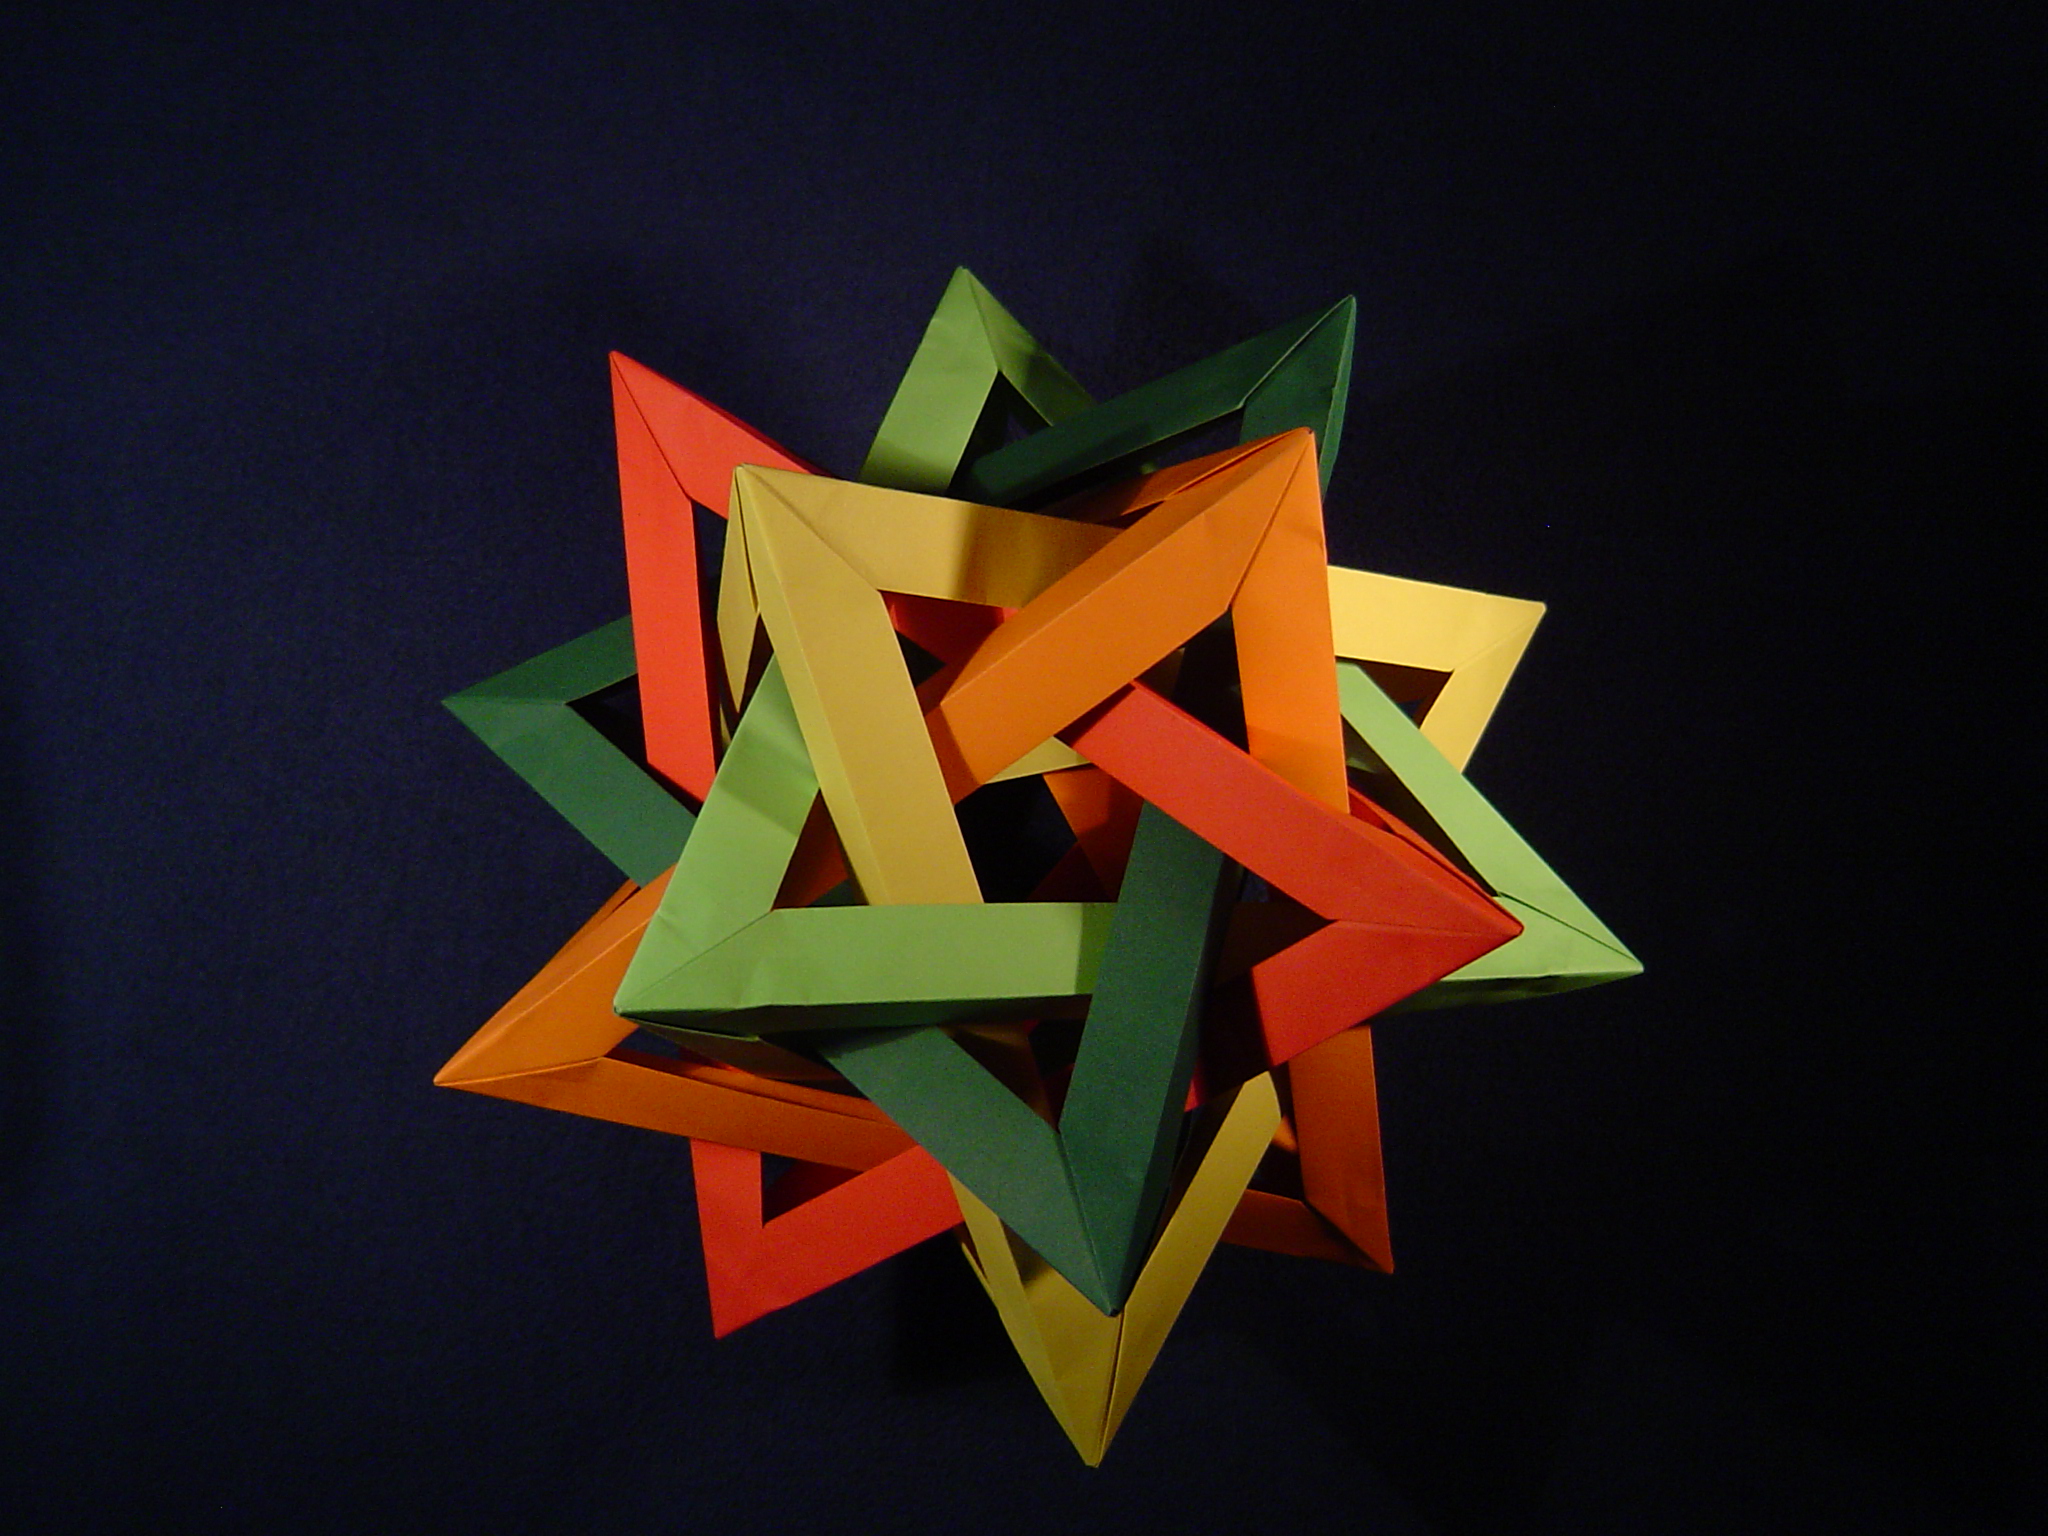 four intersected tetrahedra